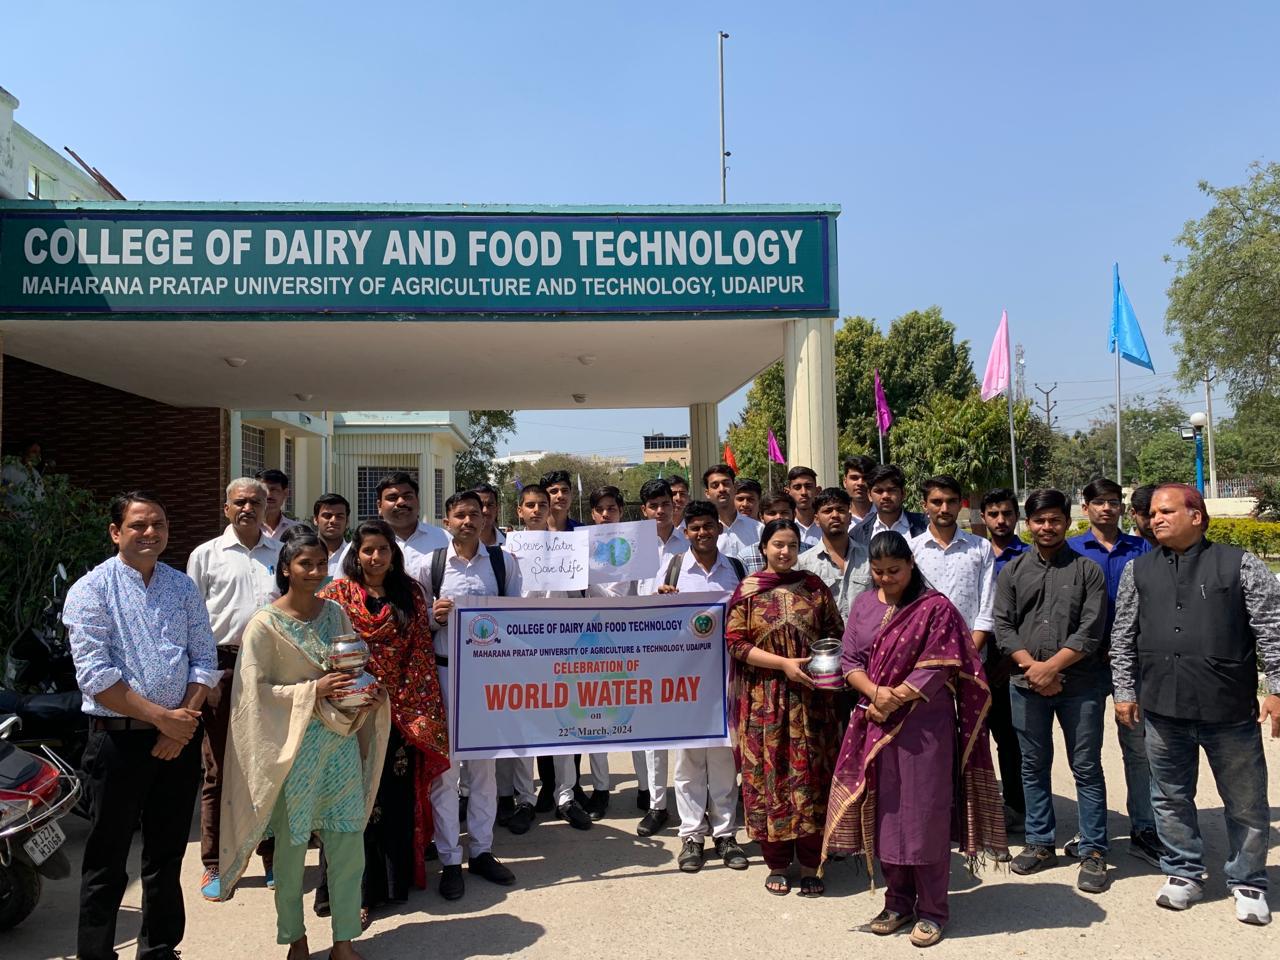 Observance of World Water Day at the Dairy and Food Technology College